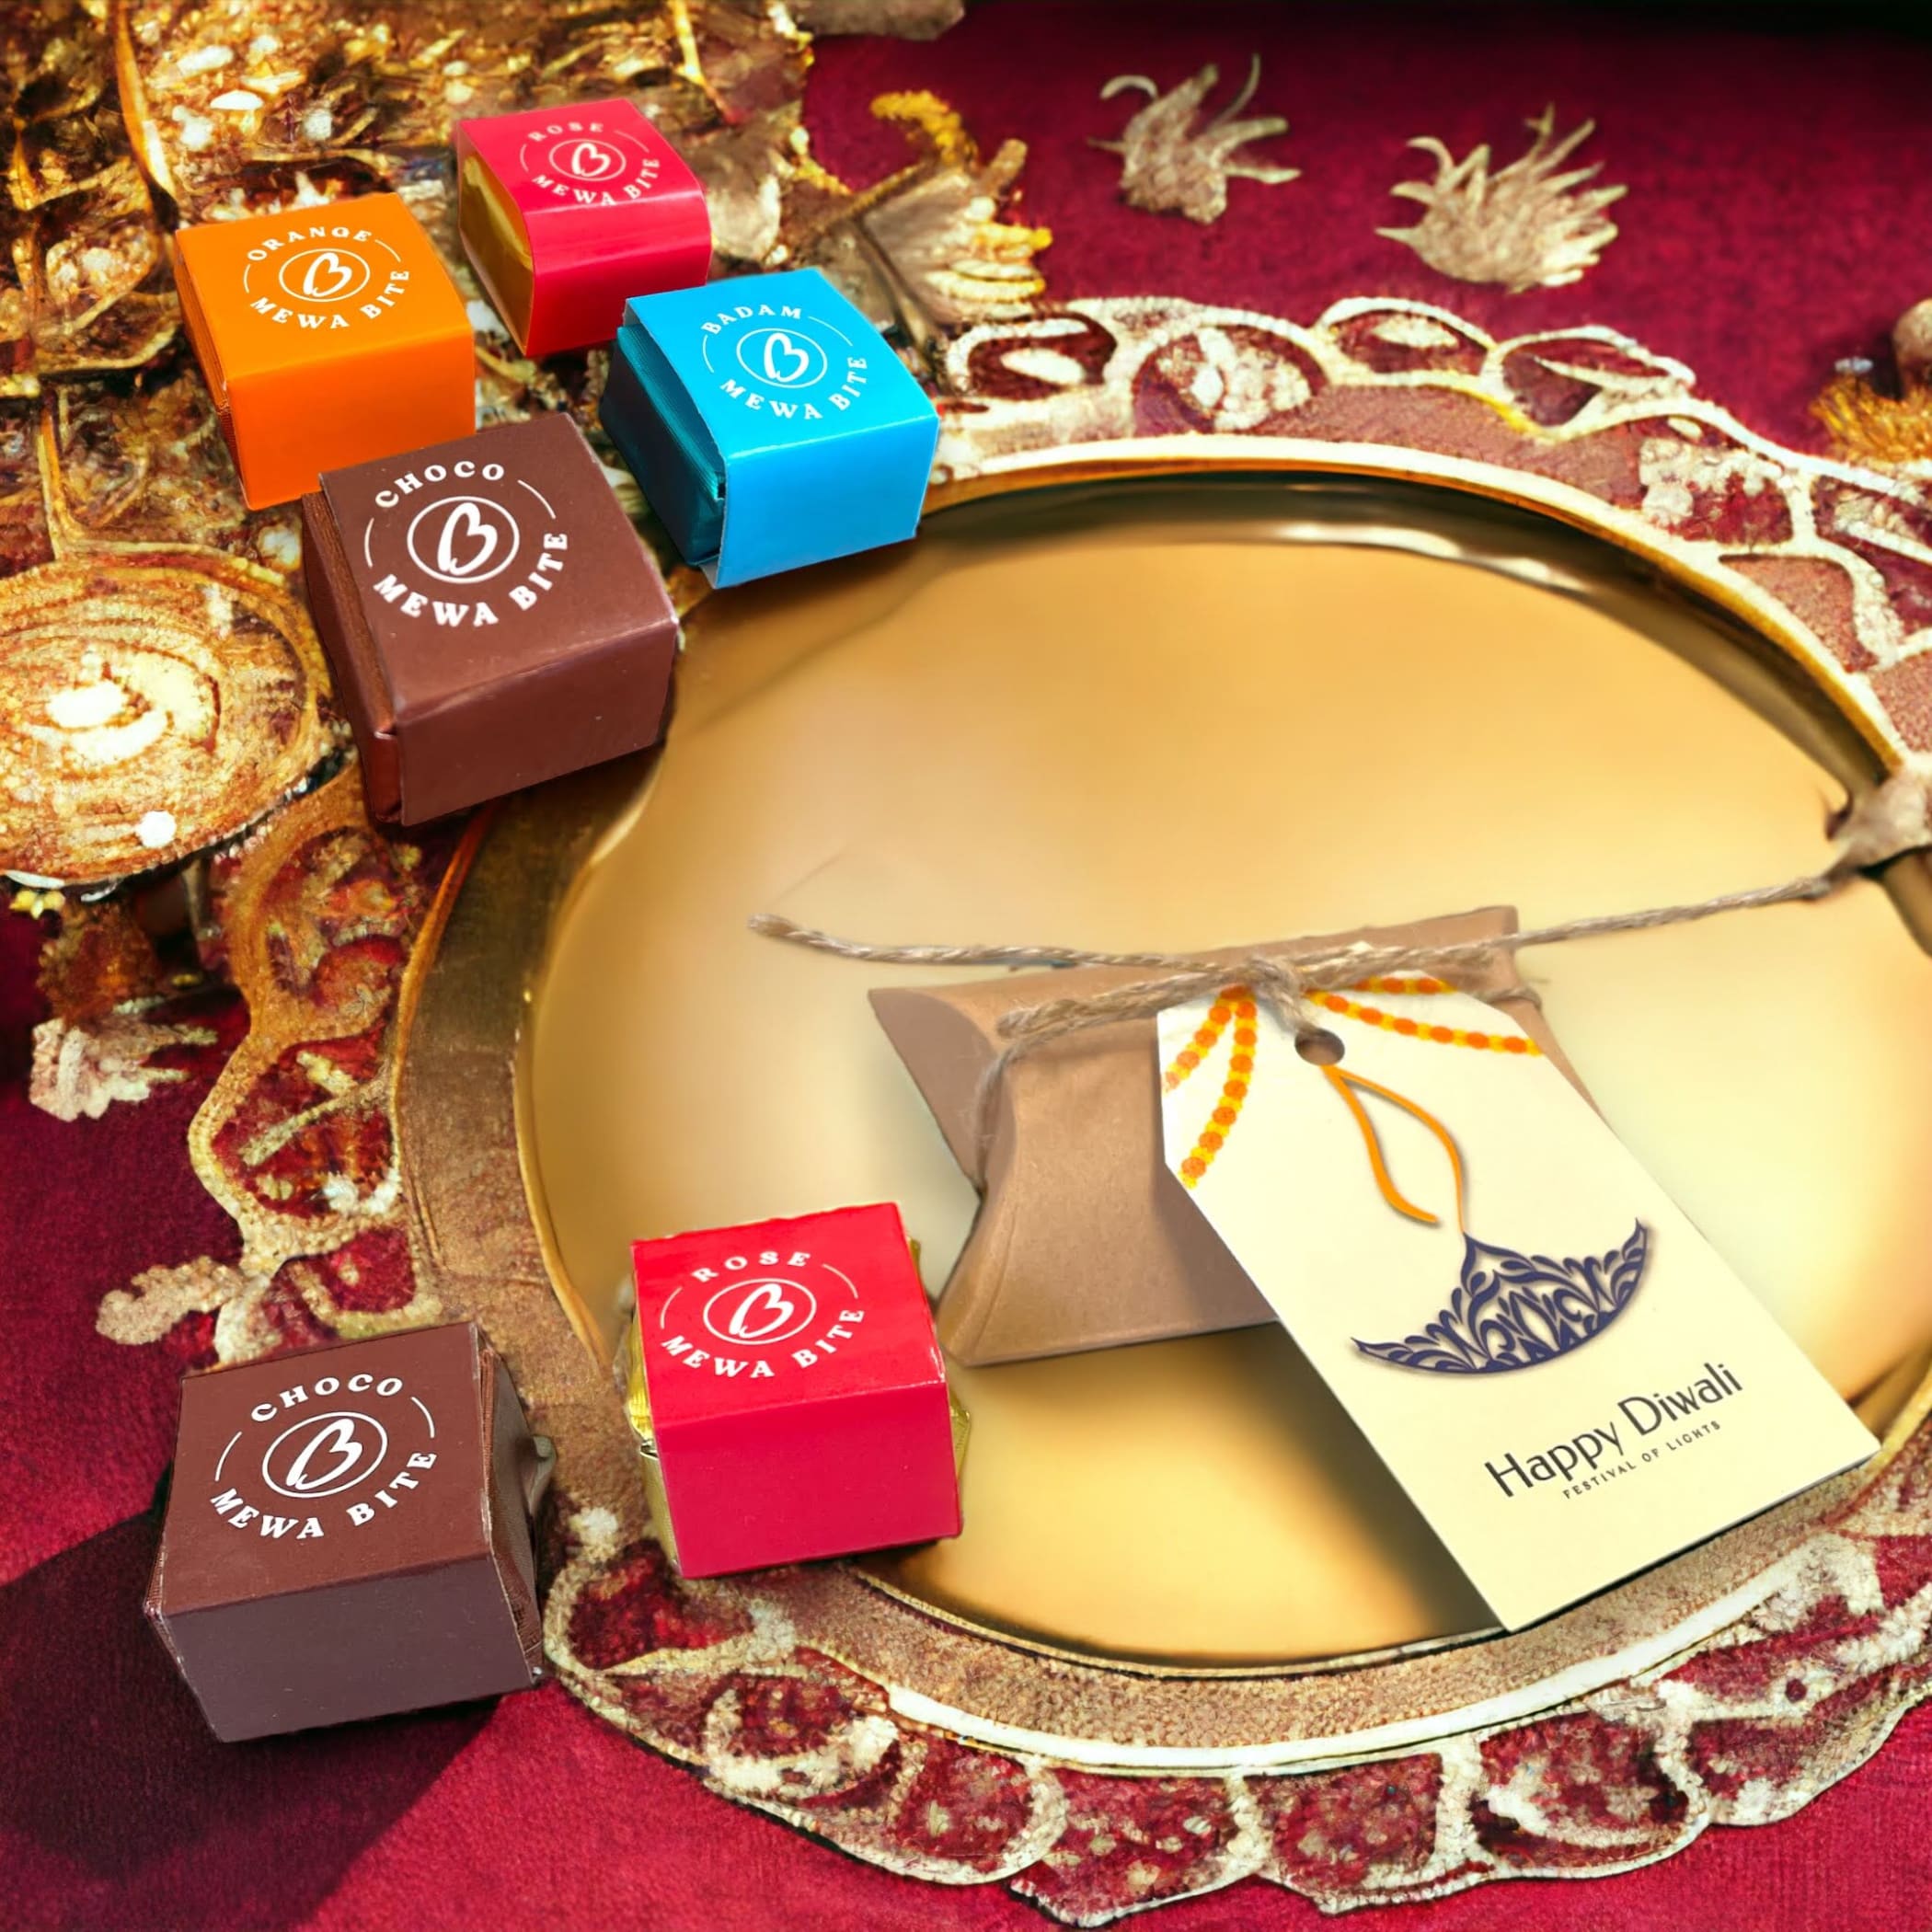 Personalized diwali gifts hamper indian gift boxes navratri